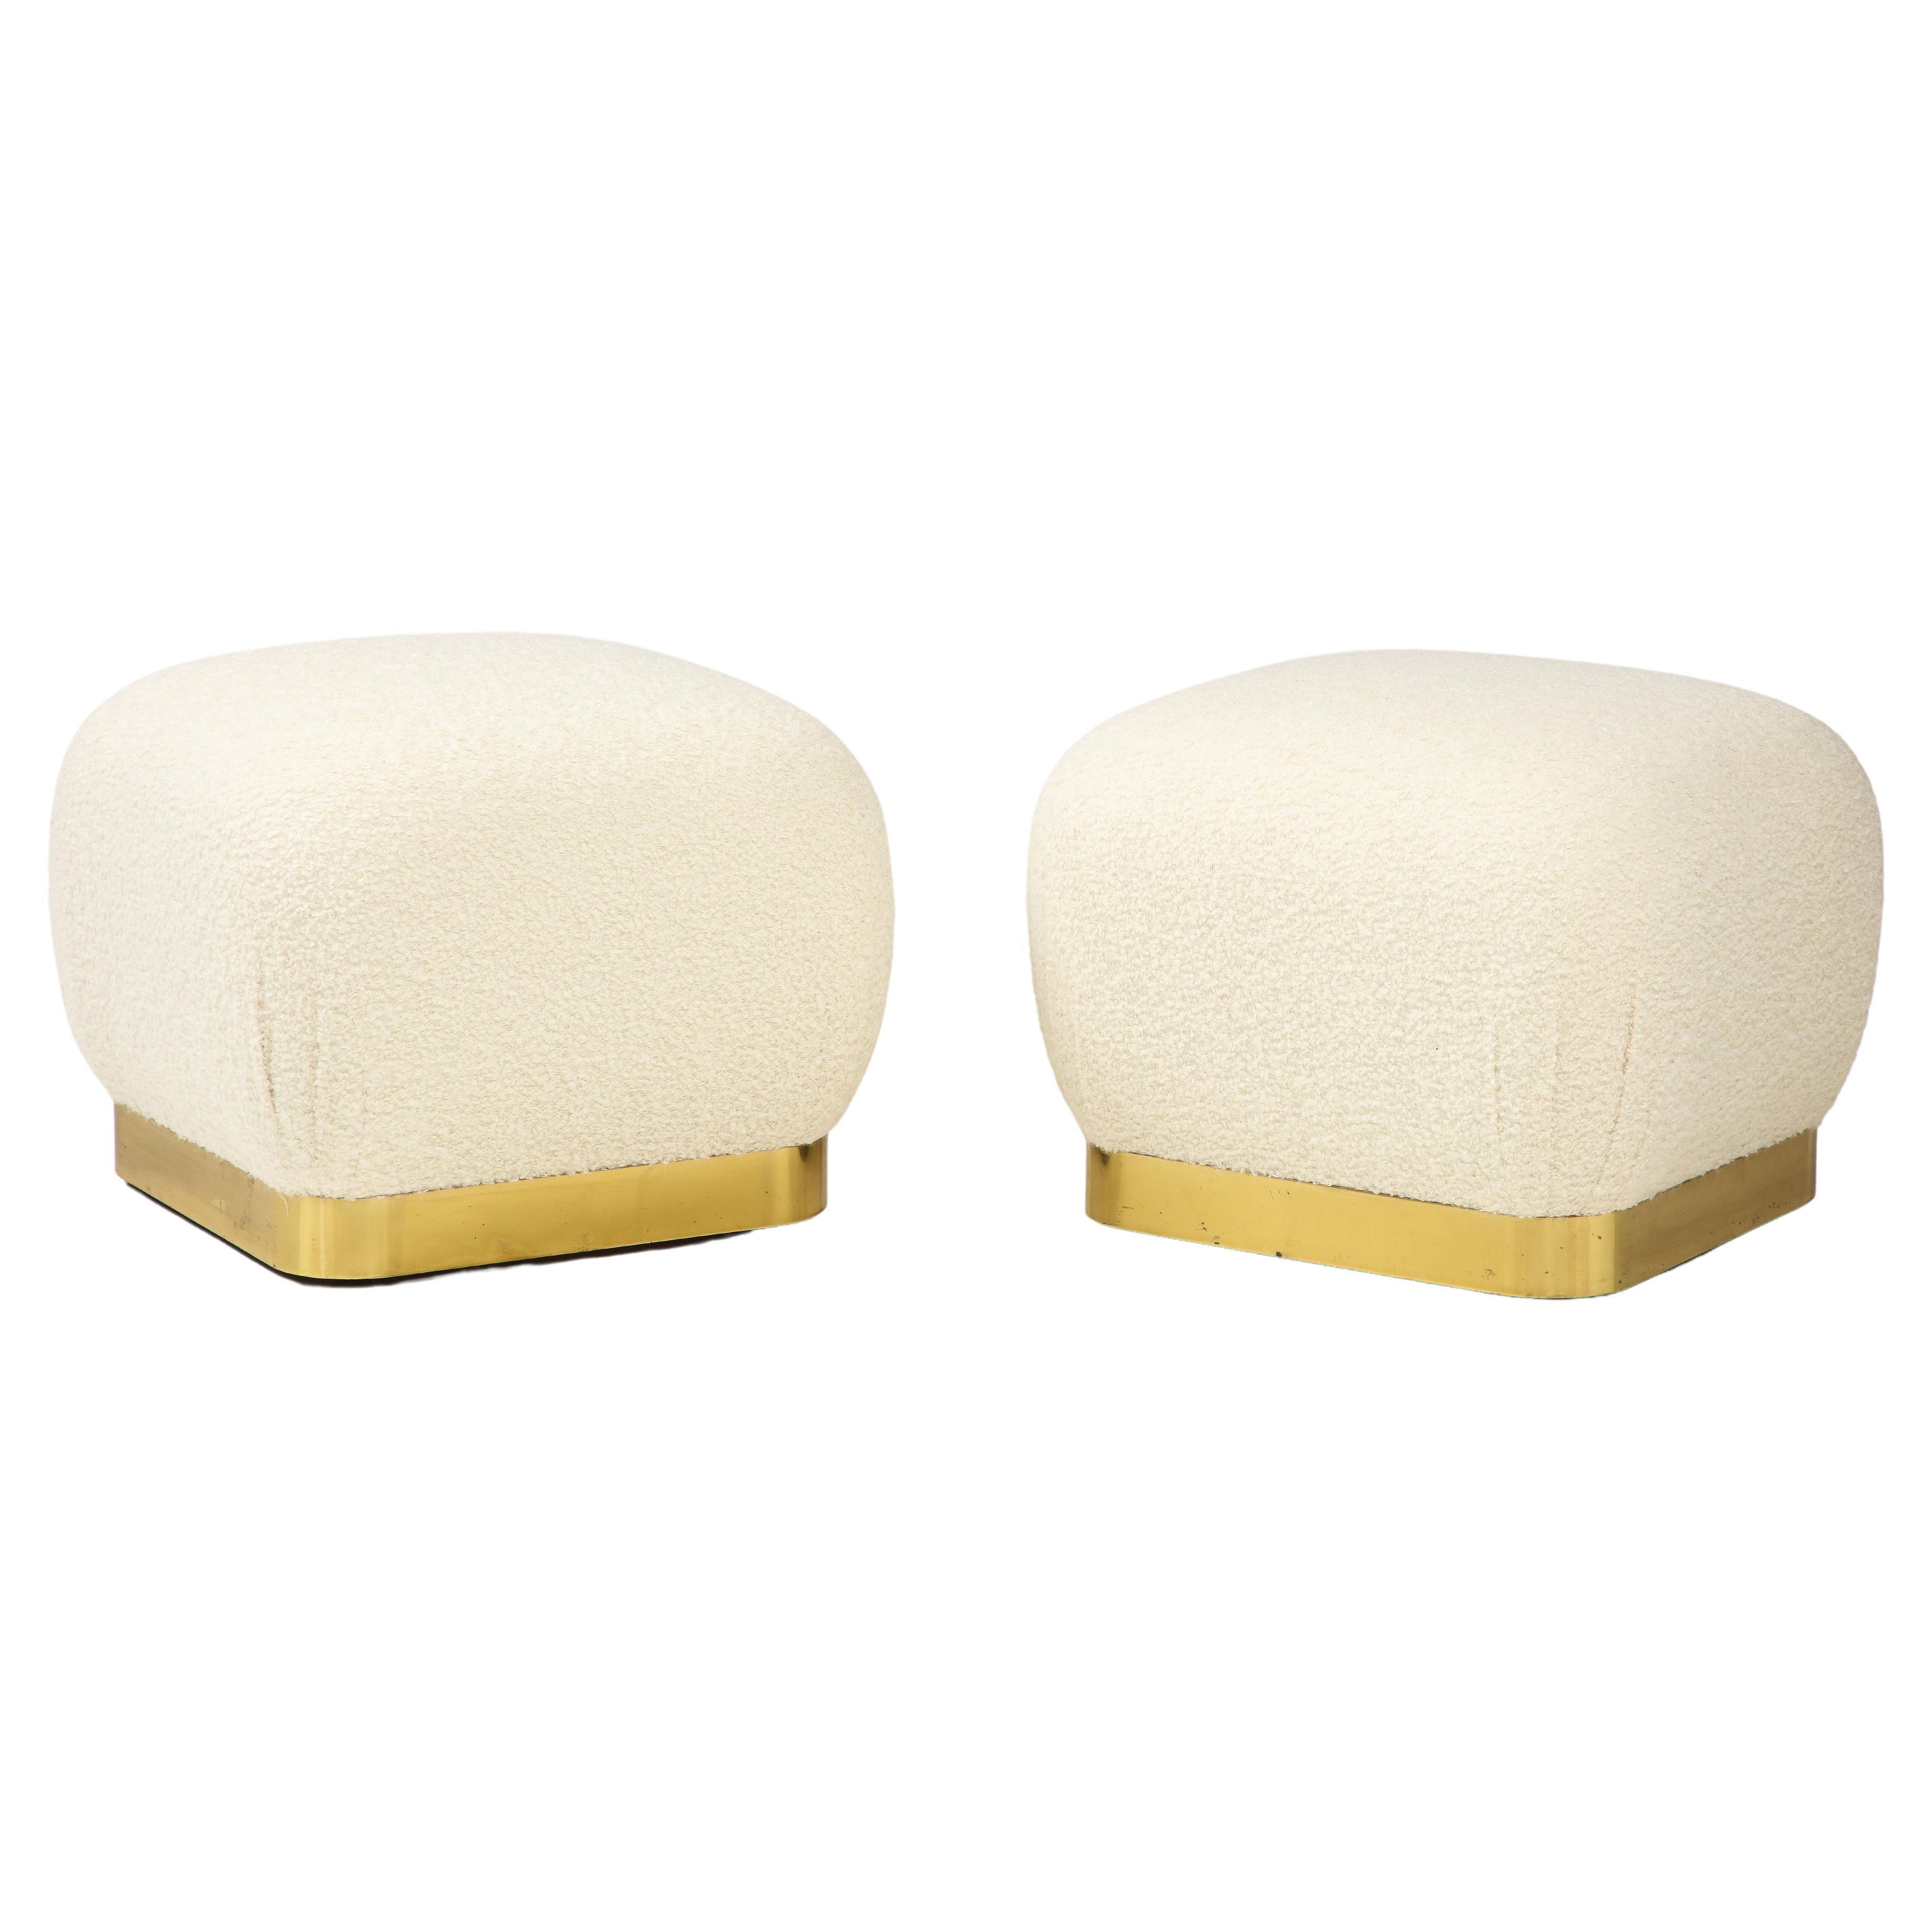 Karl Springer pair of soufflé ottomans with thick rounded ivory bouclé cushions on rounded square lacquered brass bases with caster wheels.
The brass bases are in very good original condition with a beautiful lacquer finish and some patina to the